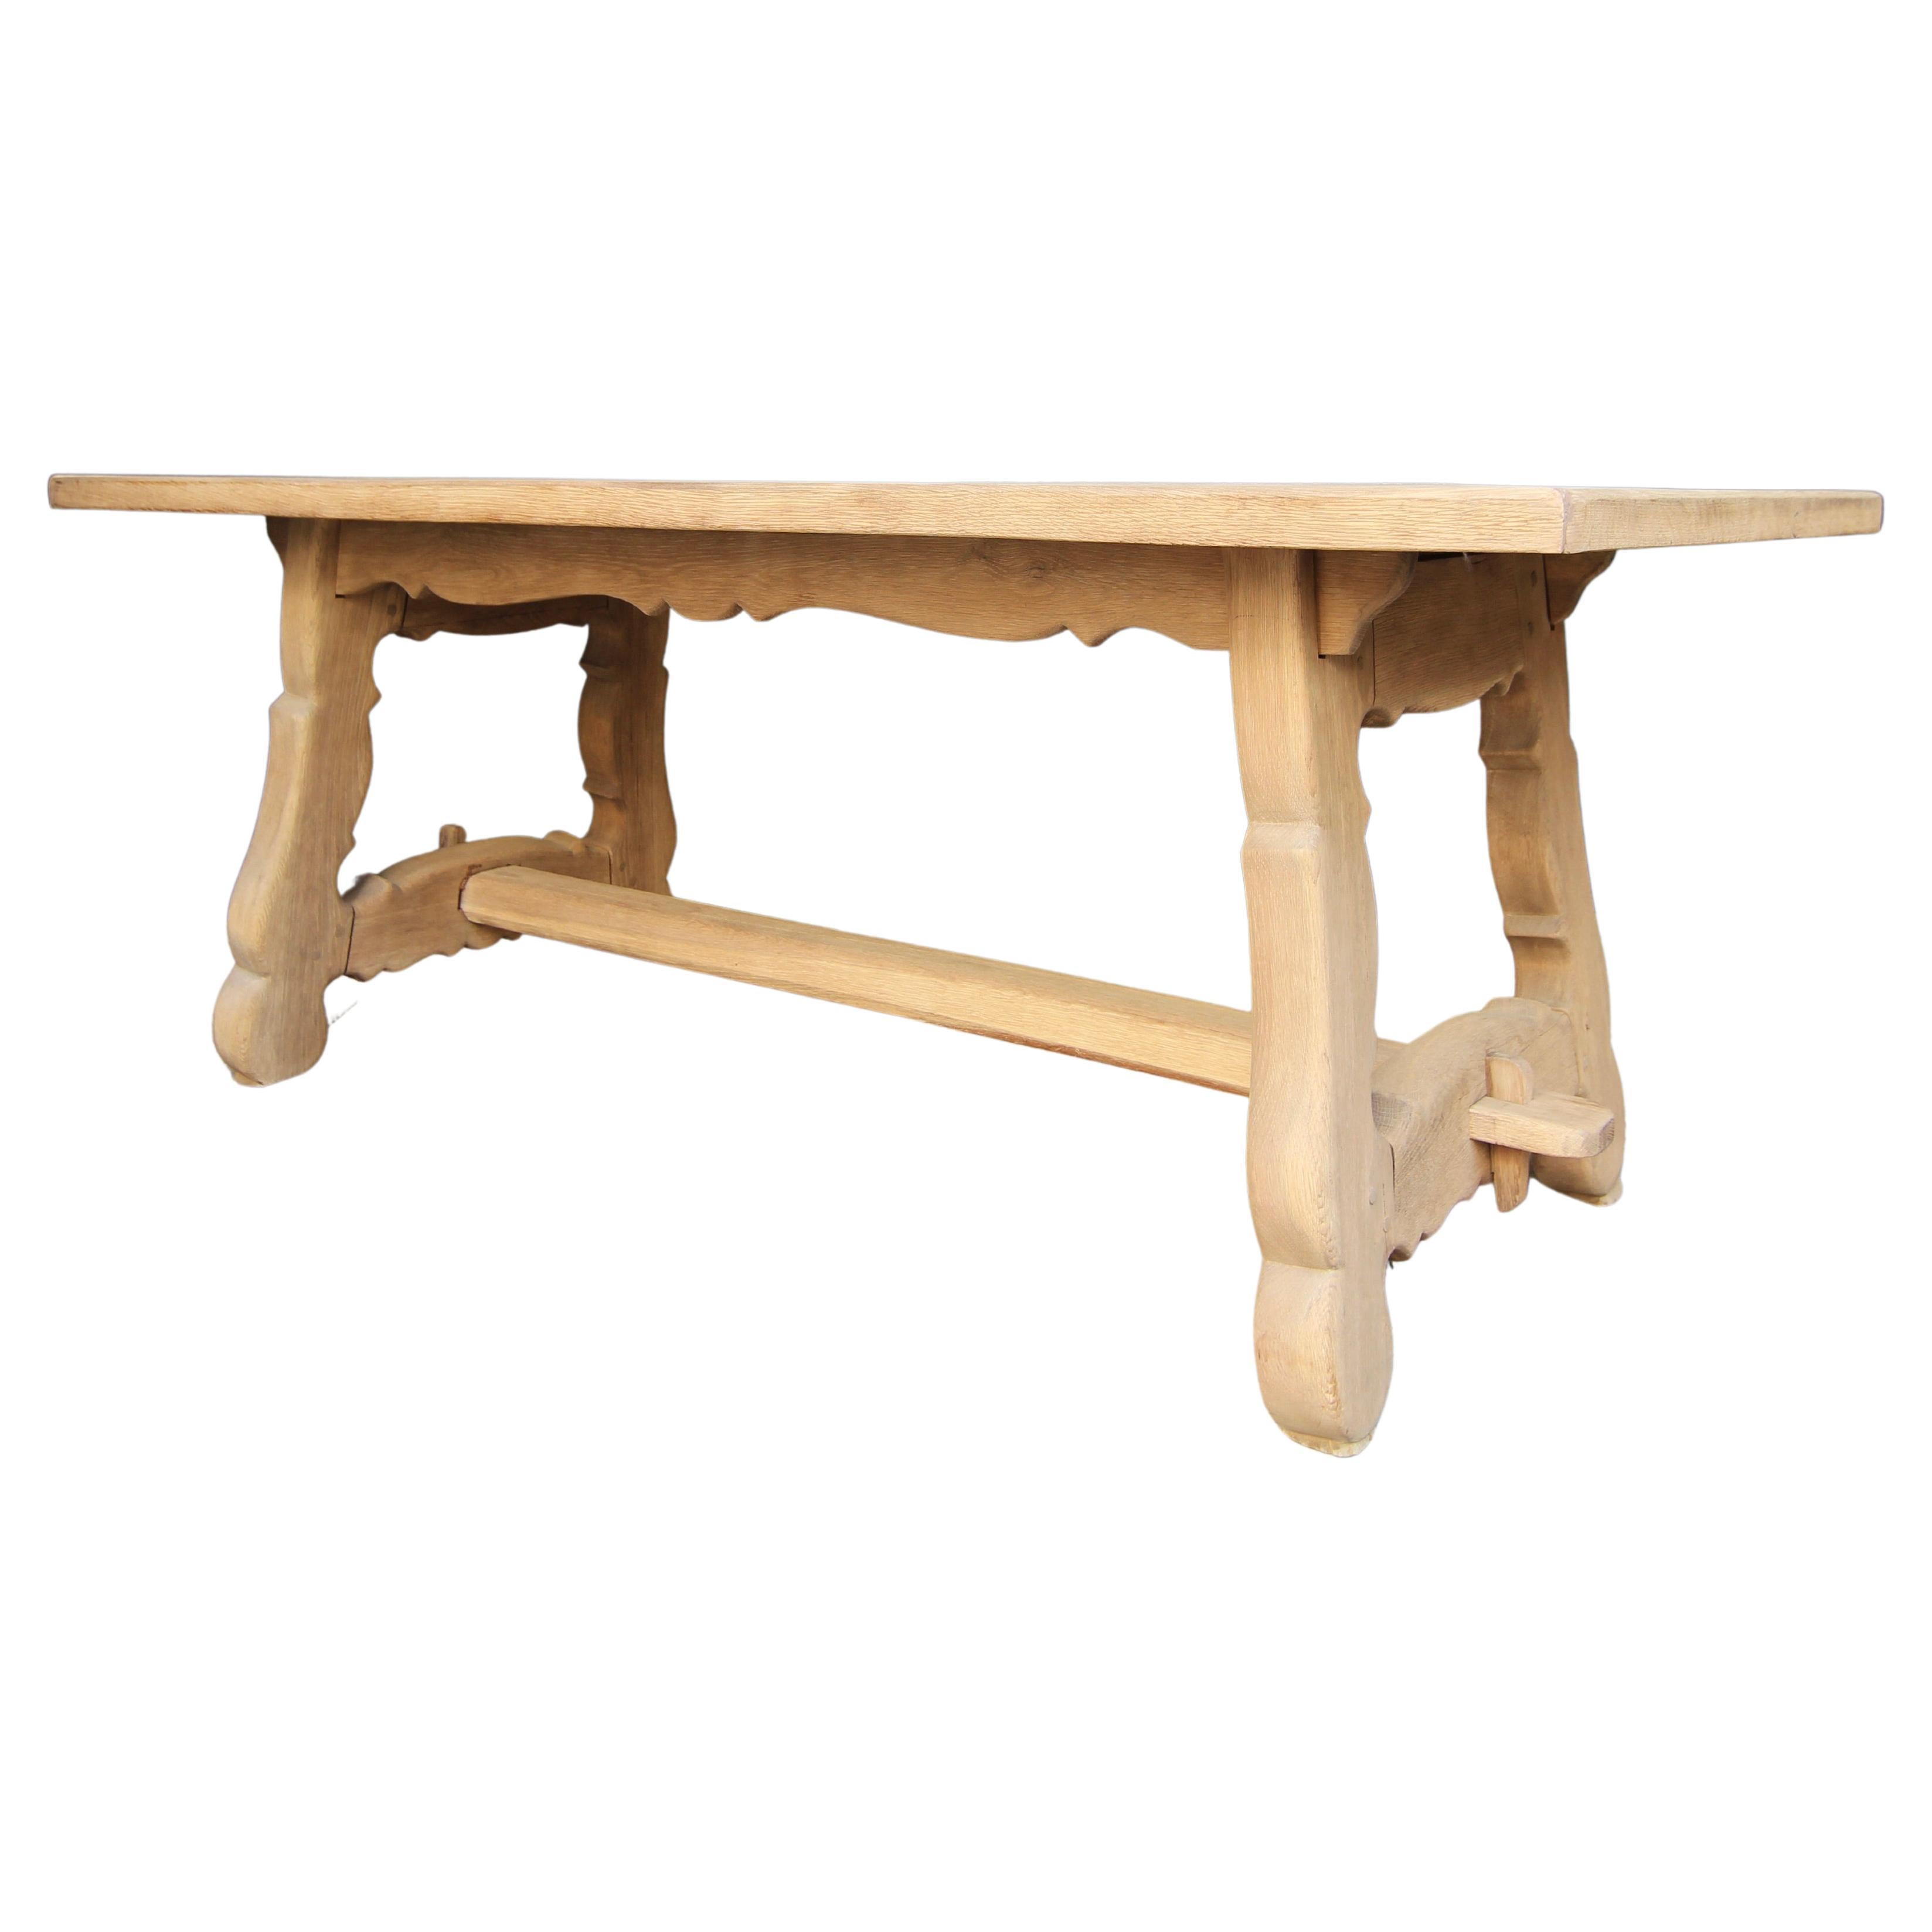 20th Century Rustic Stripped Oak Table For Sale